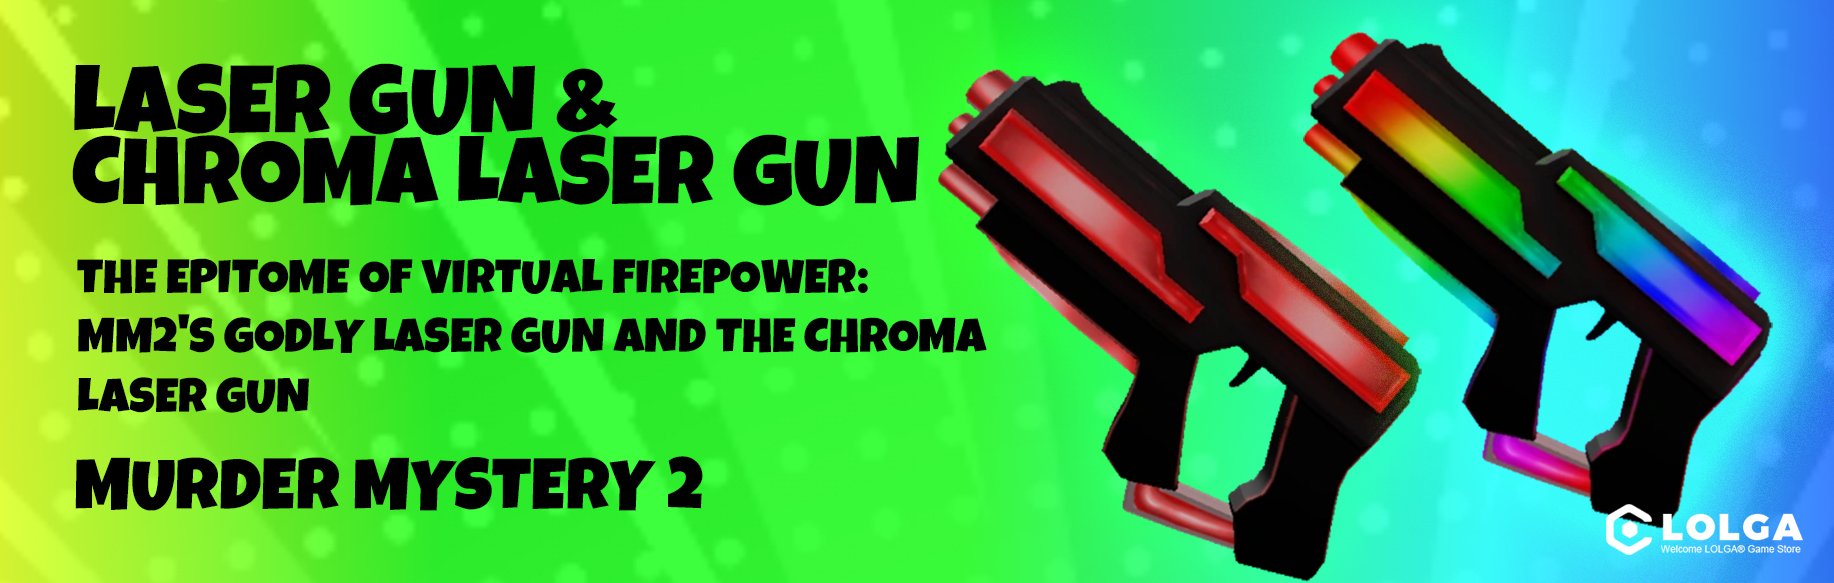 The Epitome of Virtual Firepower: MM2's Godly Laser Gun and the Chroma Laser Gun